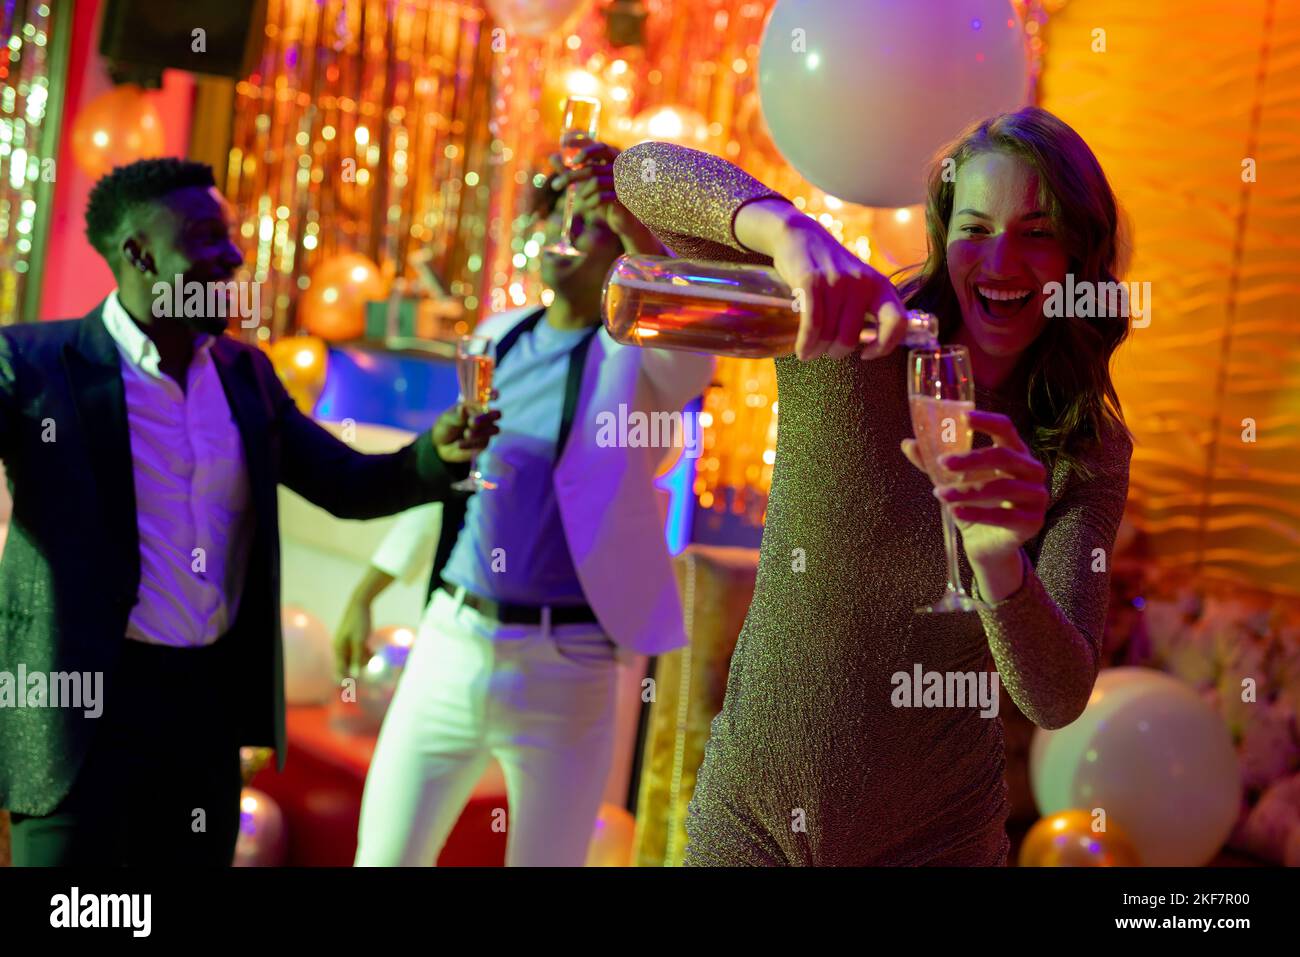 Smiling caucasian woman pouring glass of champagne at nightclub. Fun, drinking, going out, inclusivity and party concept. Stock Photo